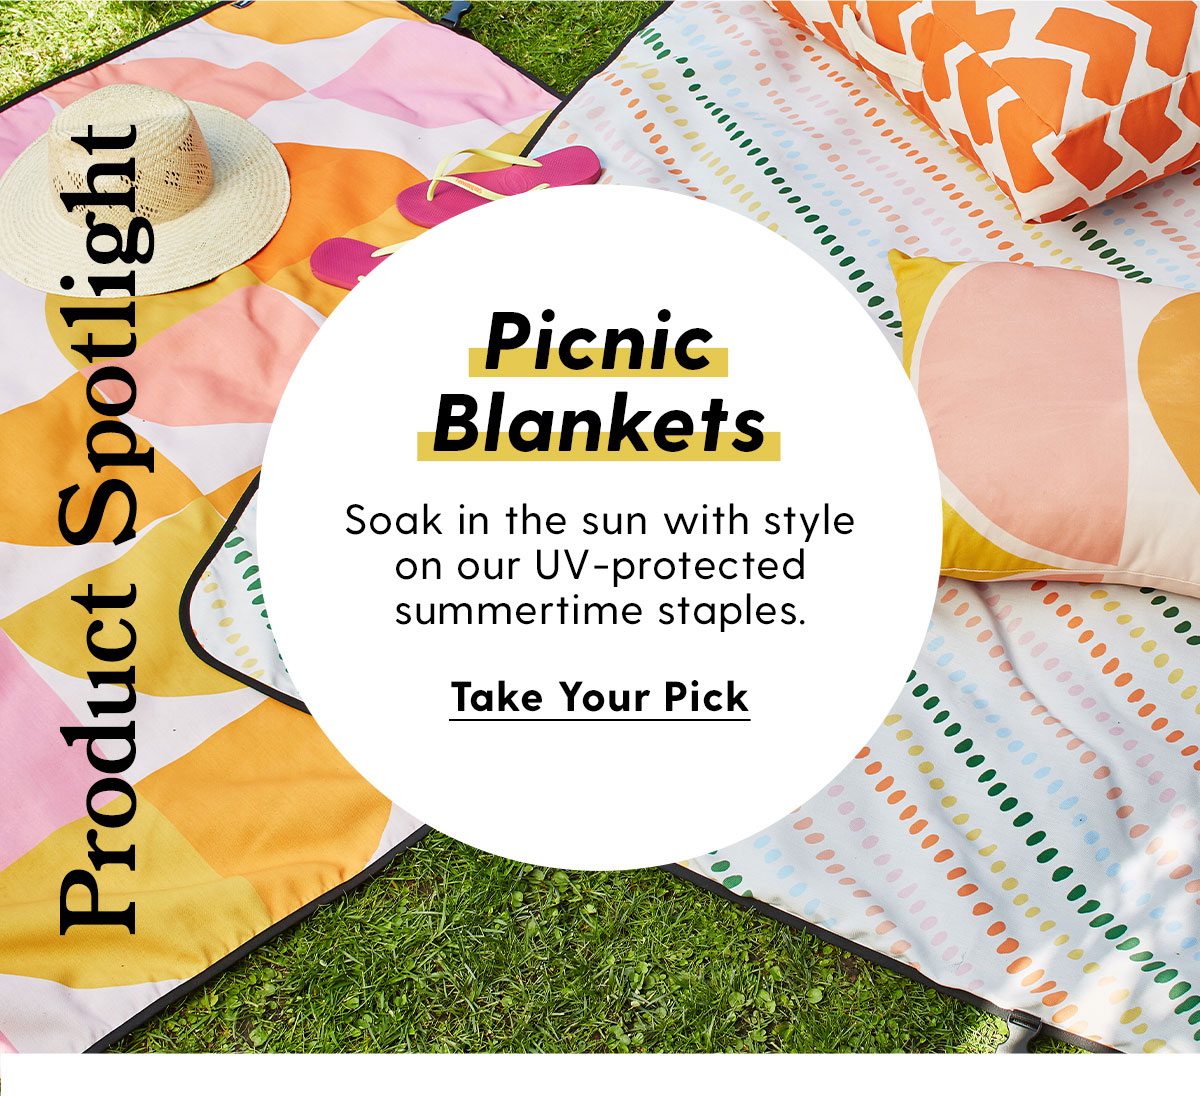 Product Spotlight: Picnic Blankets: Soak in the sun with style on our UV-protected summertime staples. Take Your Pick